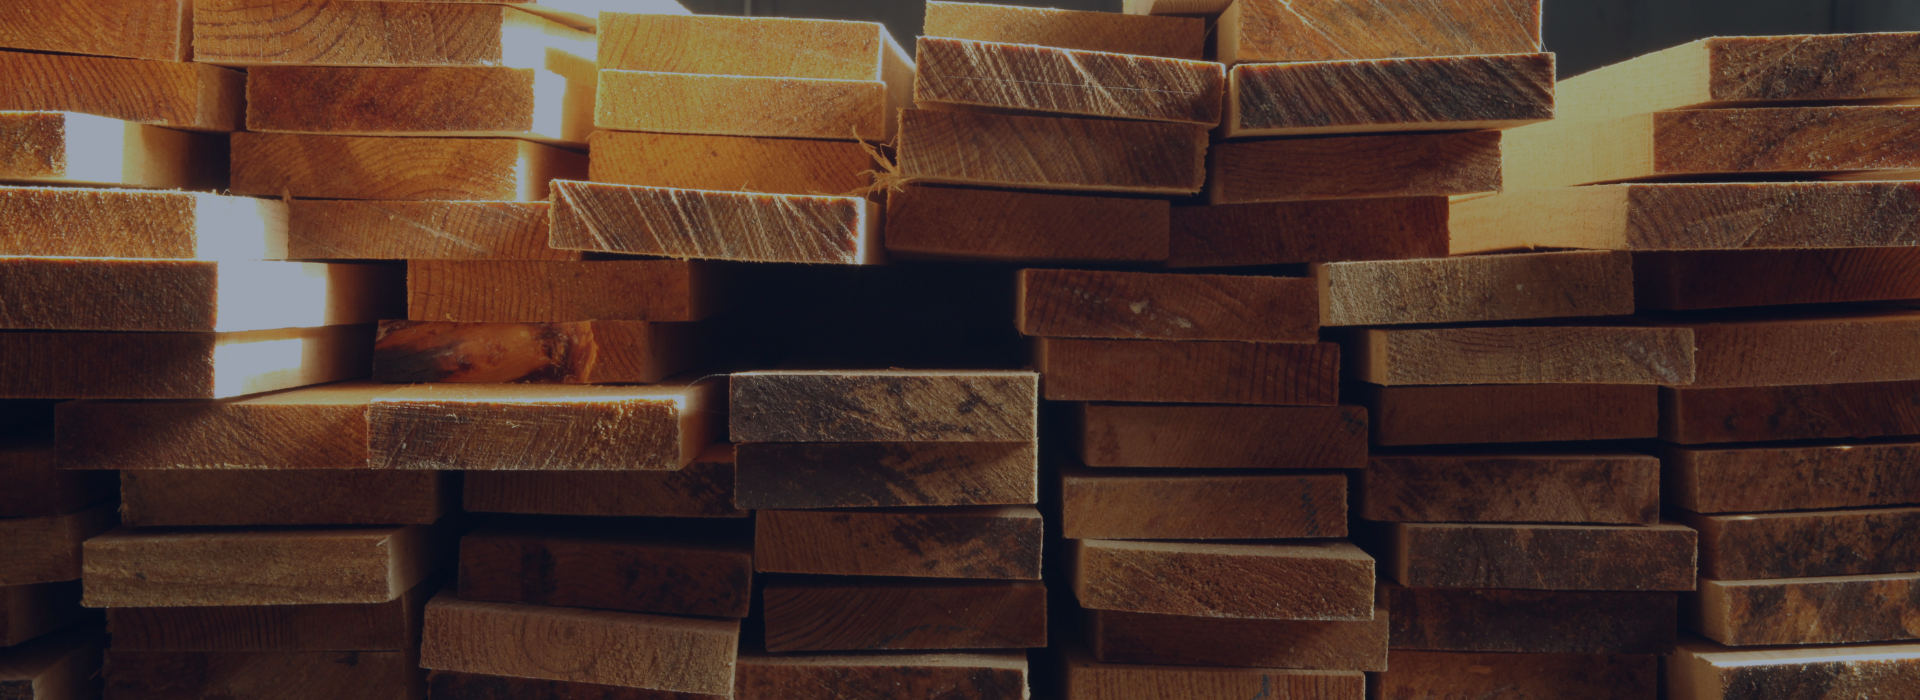 lumber is stacked in a pile